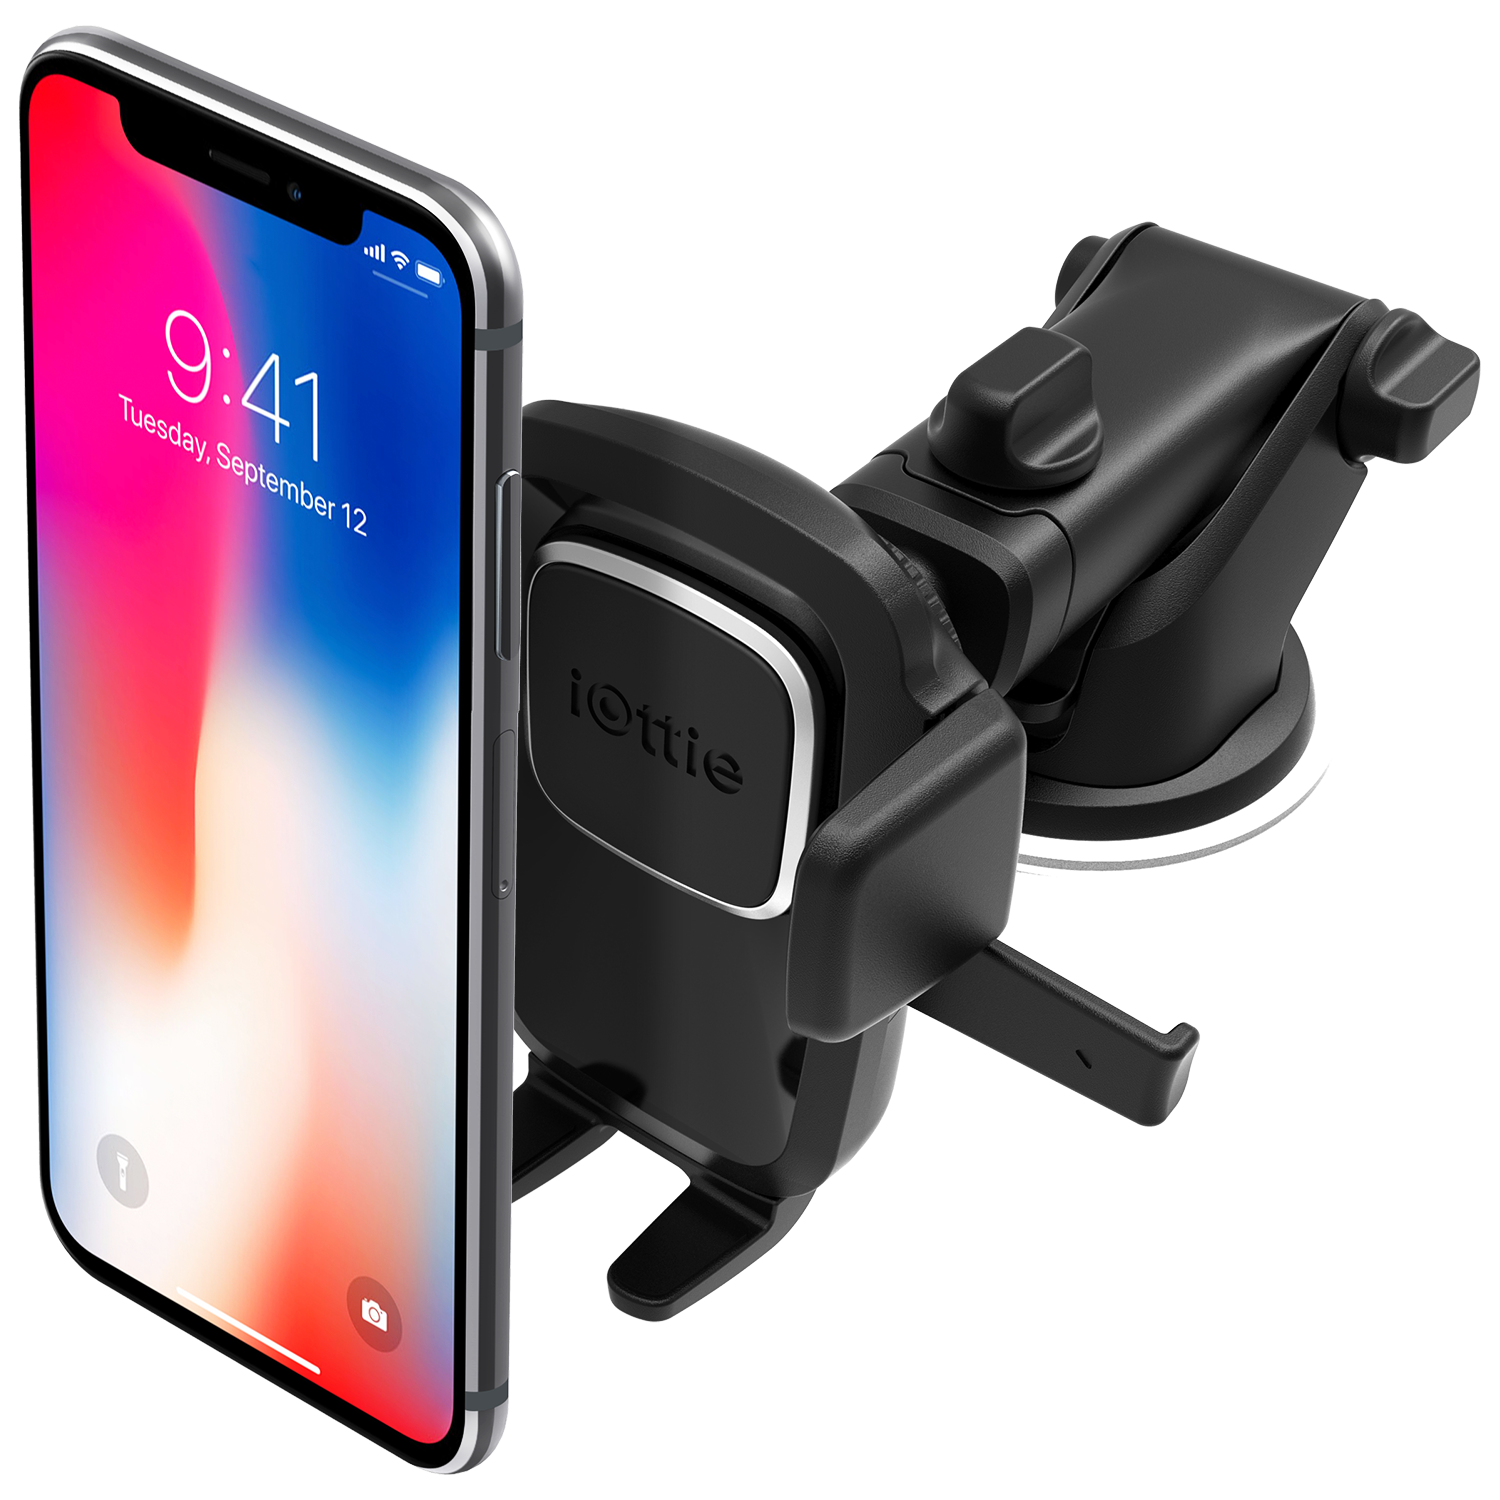 phone mounted on the iOttie Easy One Touch 4 Dash & Windshield universal car mount phone holder for iPhone, Samsung, Moto, Huawei, Nokia, LG, Smartphones, Google smartphones